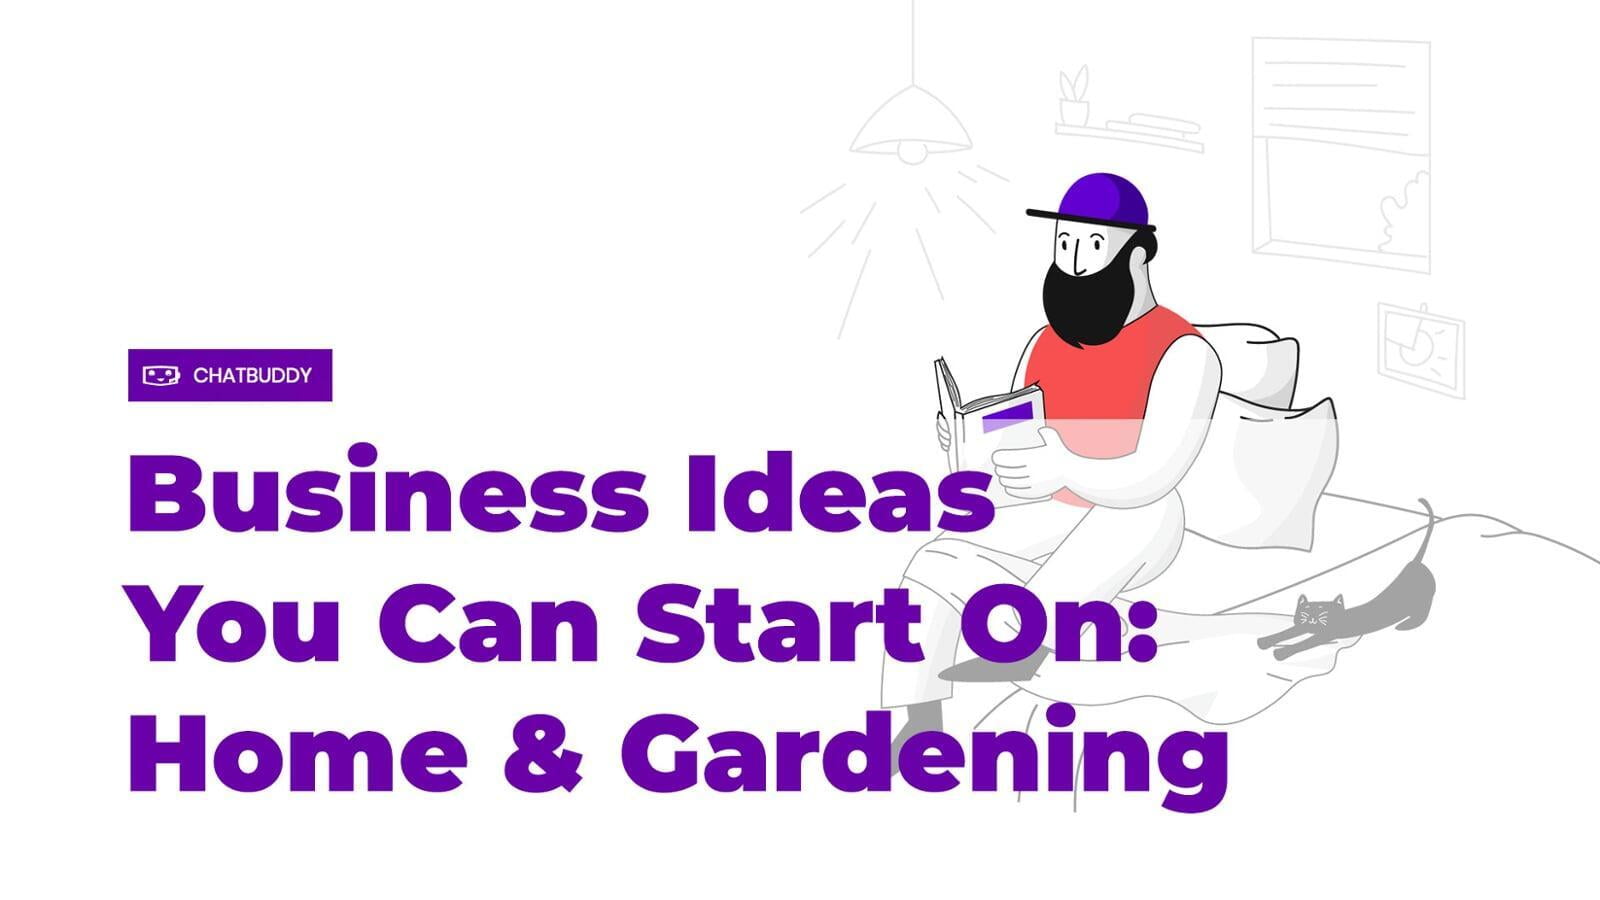 Business Ideas You Can Start On: Home & Gardening